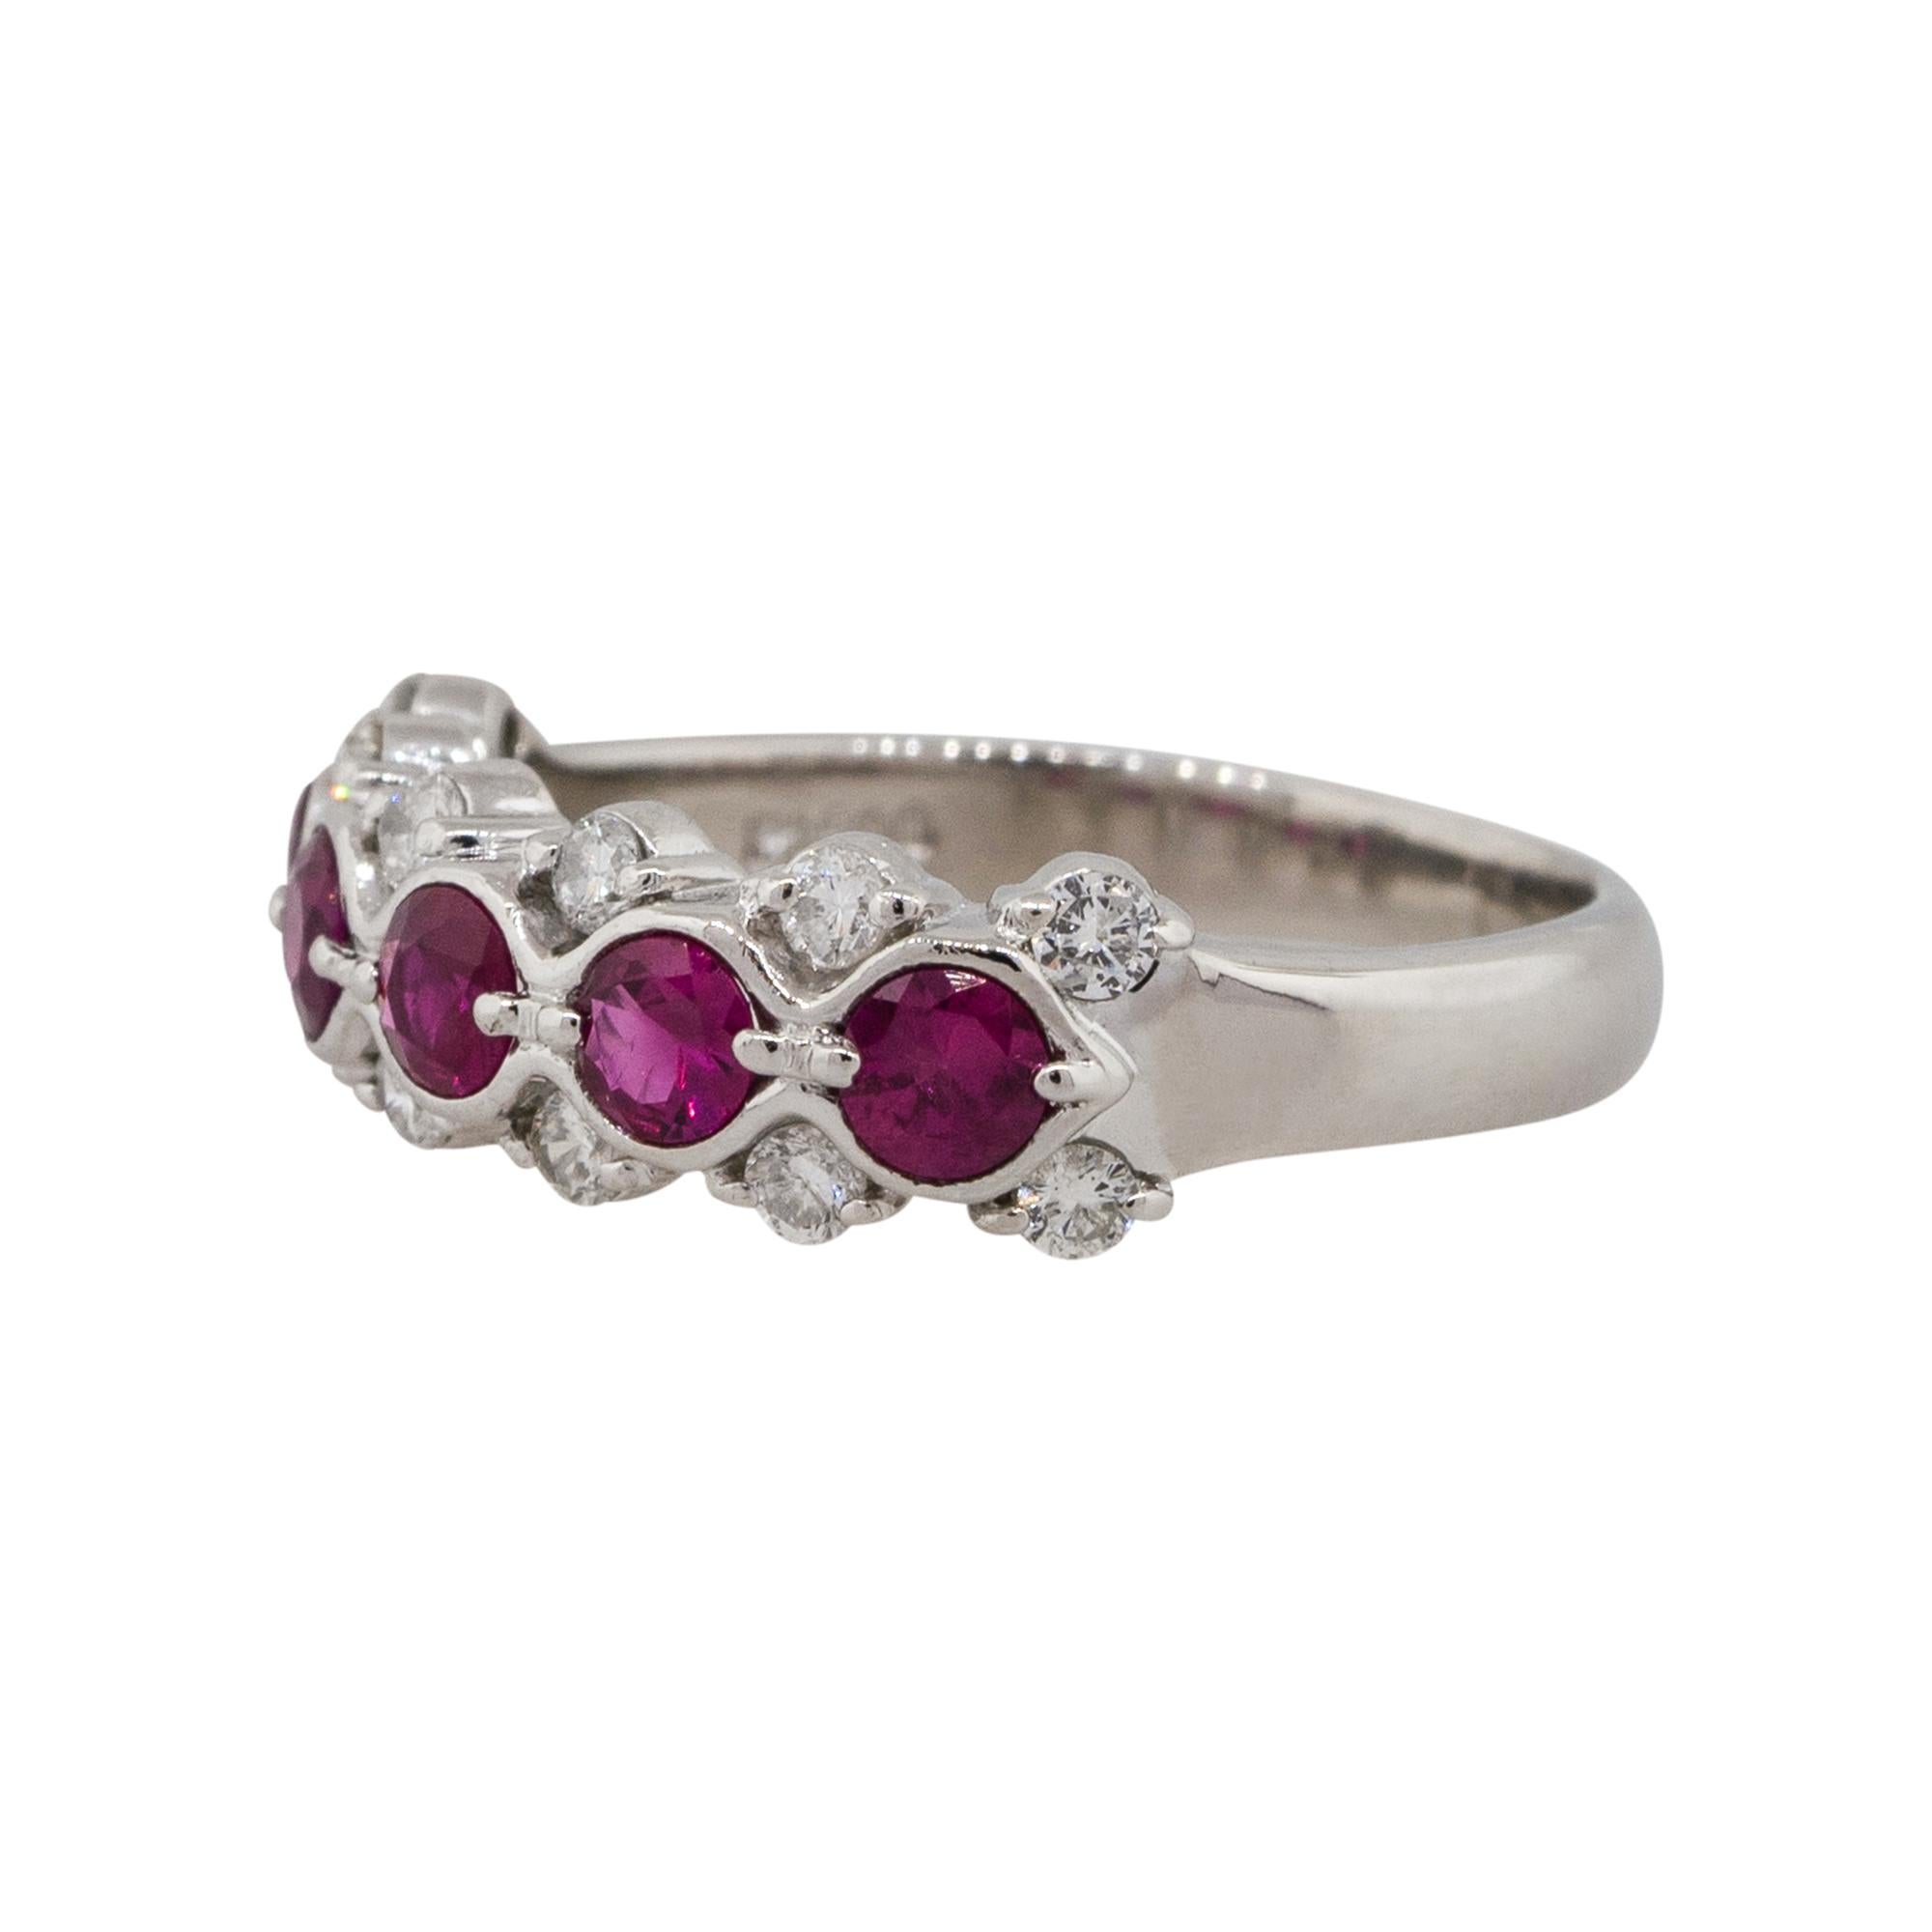 Material: Platinum
Gemstone details: Approx. 0.75ctw Round cut Ruby gemstones
Diamond details: Approx. 0.30ctw of Round cut Diamonds. Diamonds are G/H in color and VS in clarity
Ring Size: 6 
Ring Measurements: 0.75